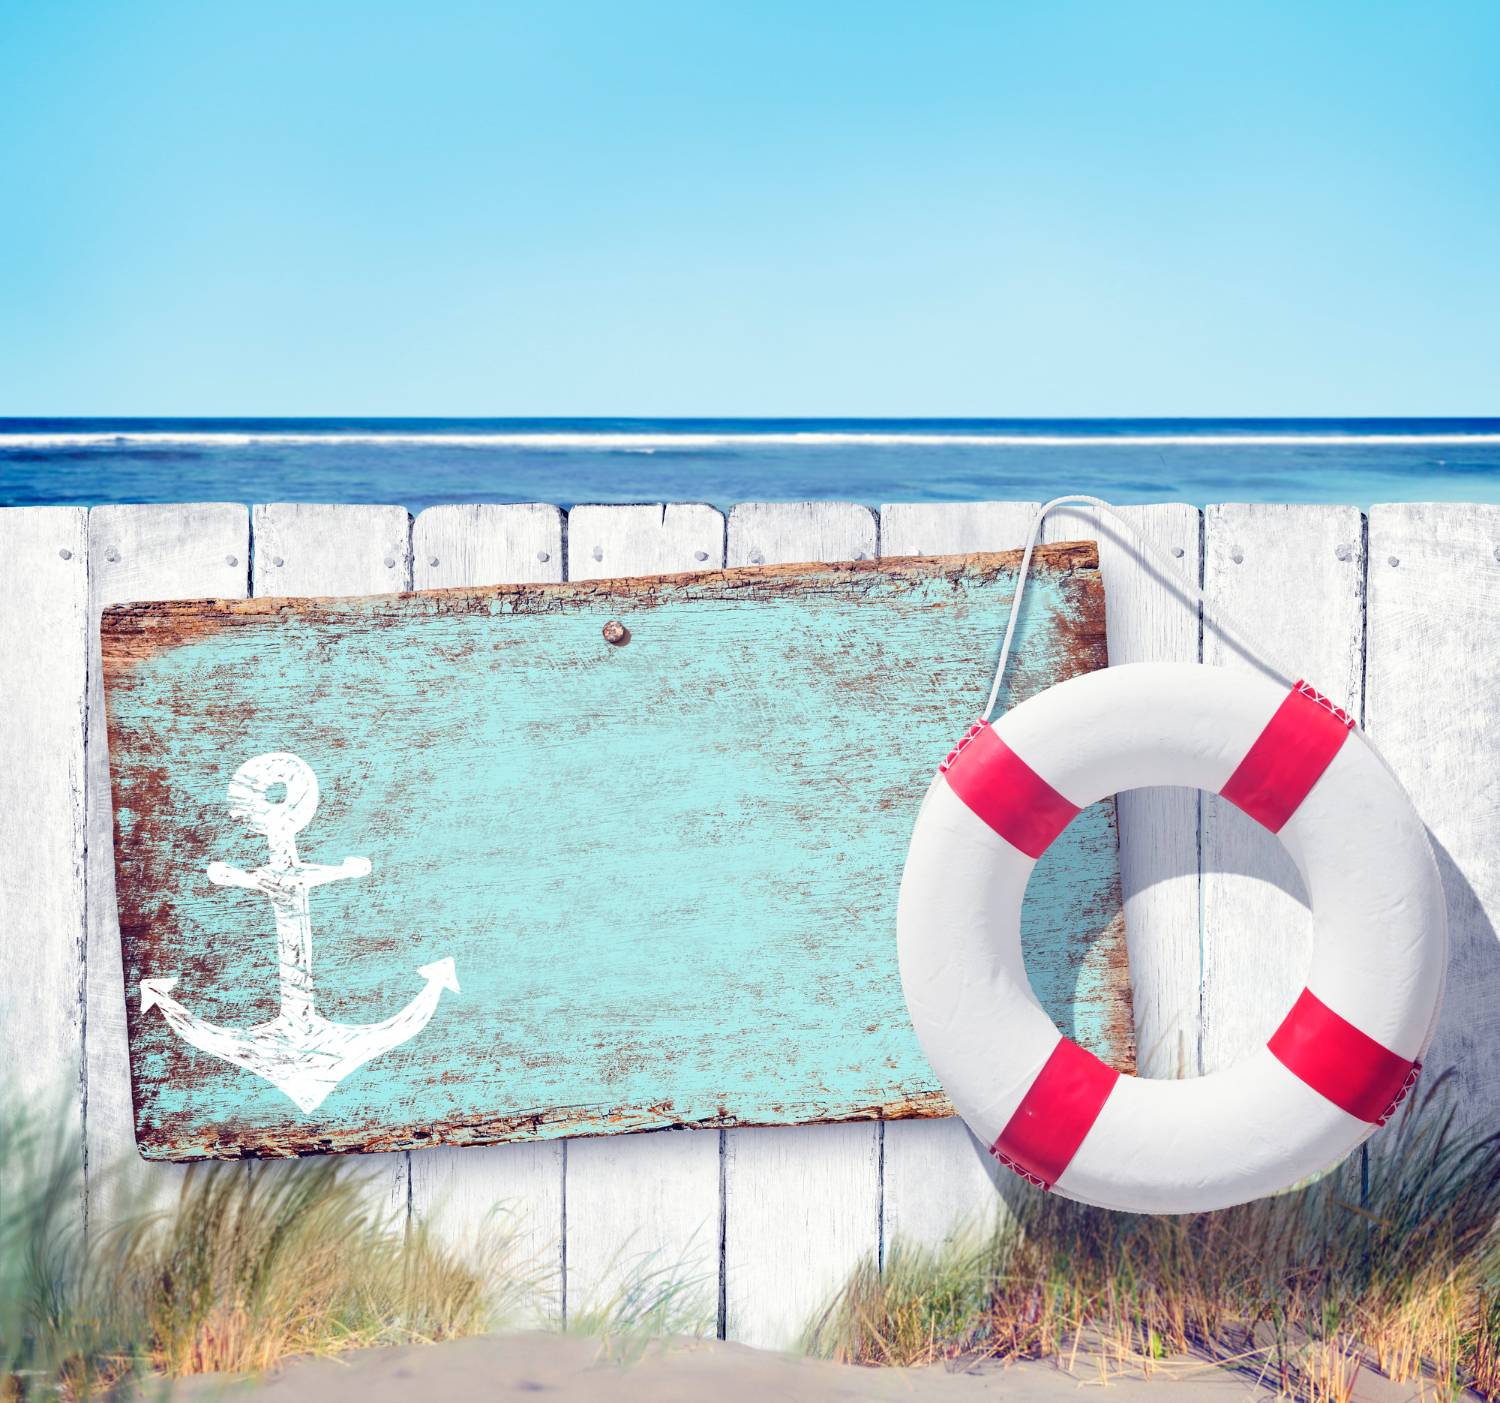 A lifebuoy hangs on a wooden fence with a painted anchor sign near the beach.